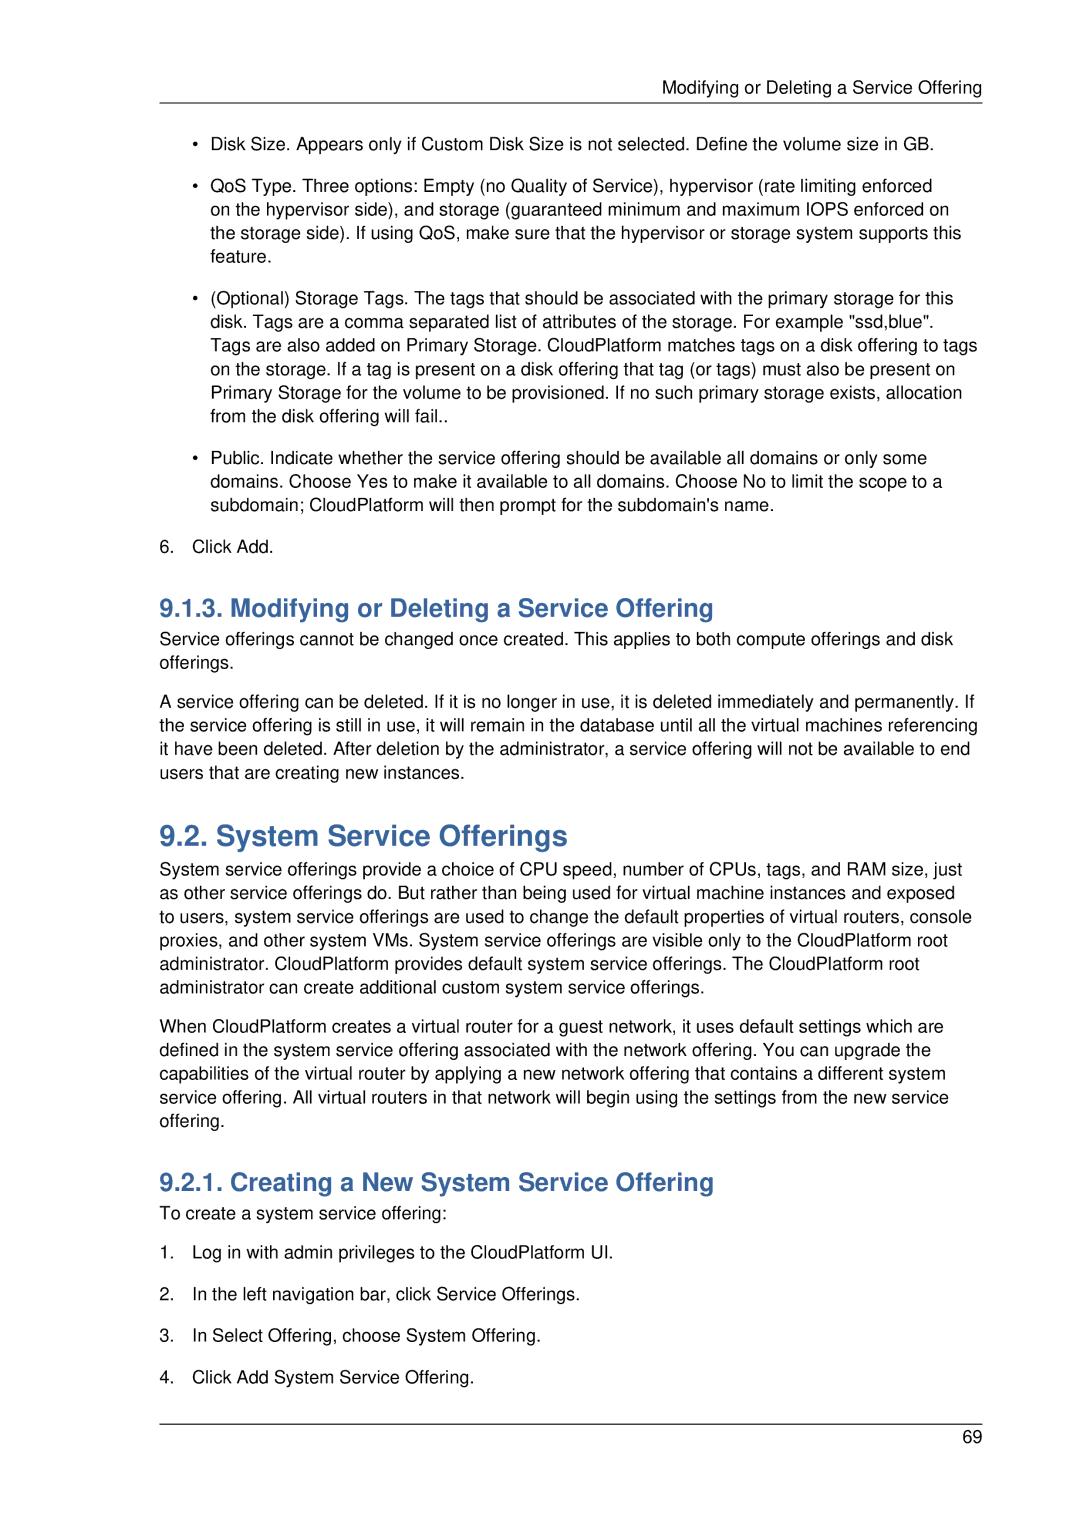 Citrix Systems 4.2 manual System Service Offerings, Modifying or Deleting a Service Offering 